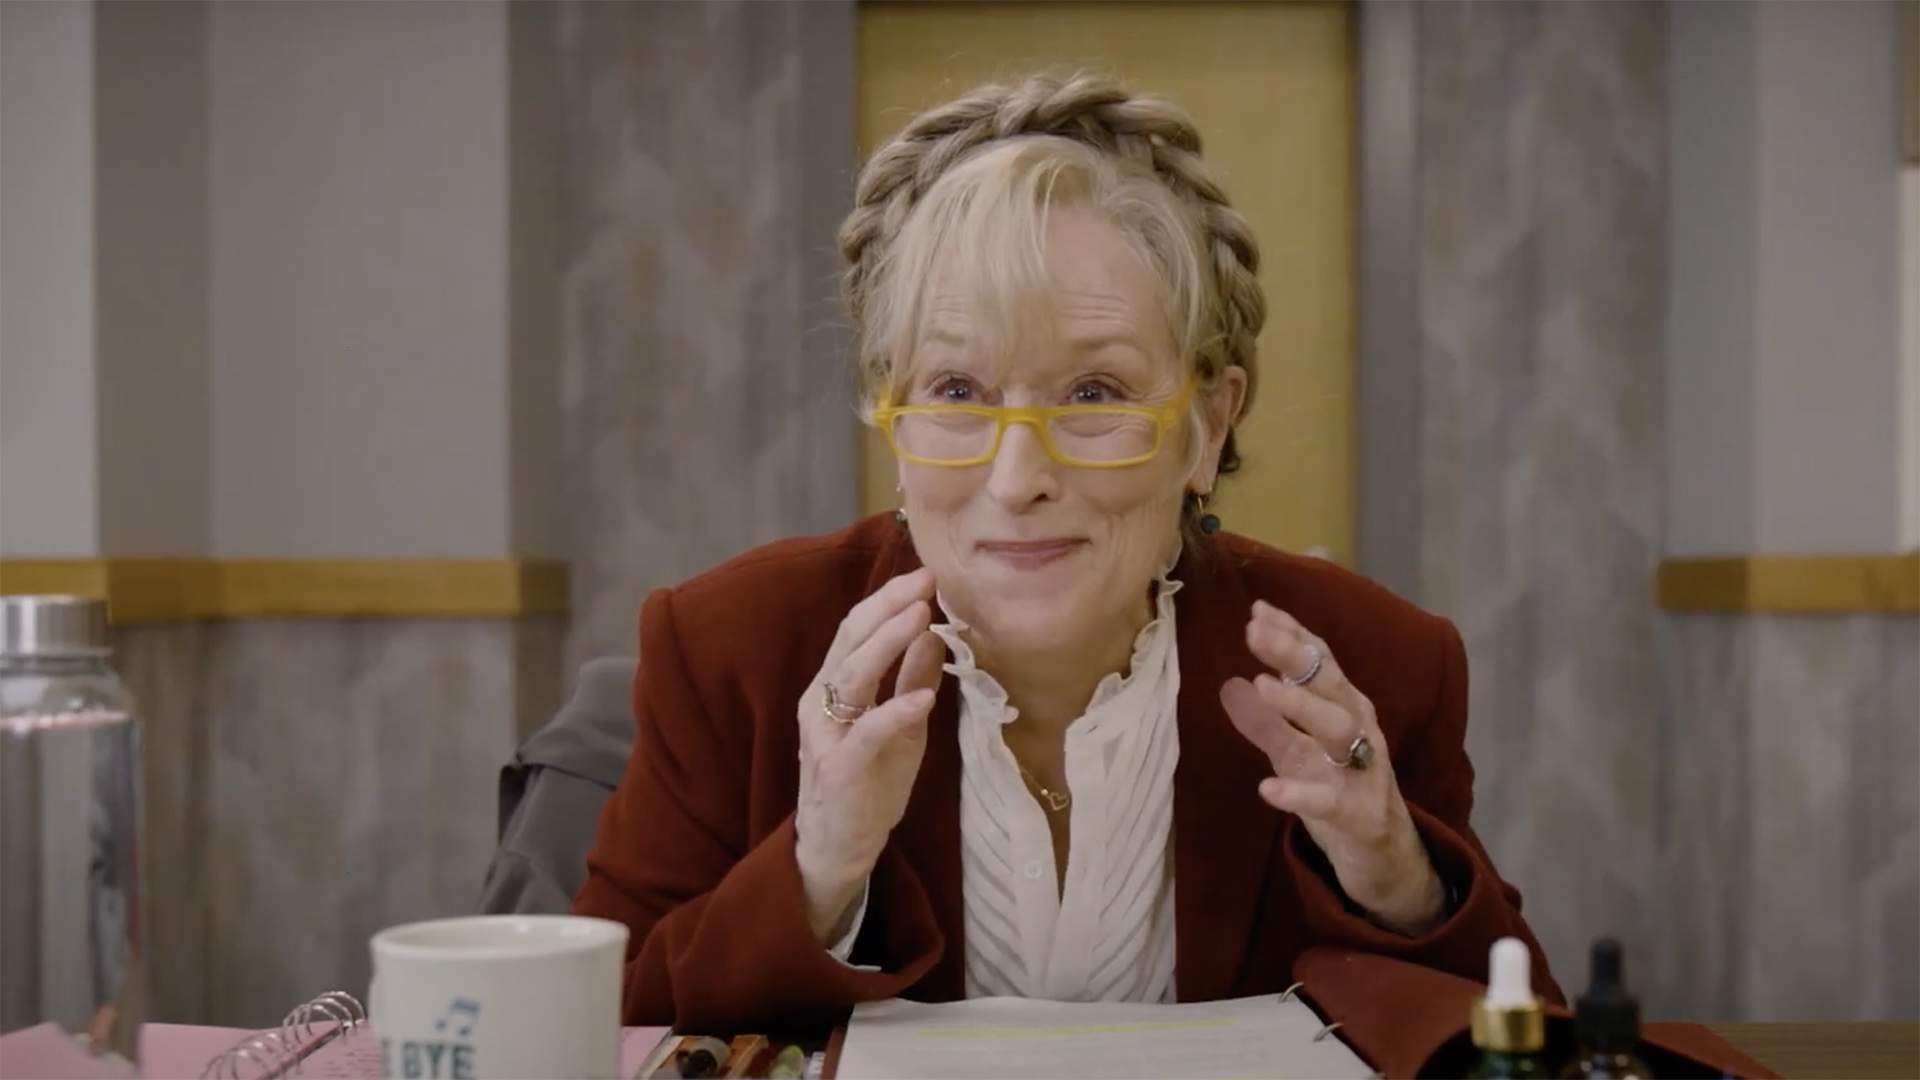 The First 'Only Murders in the Building' Season Three Trailer Is Here with a Glimpse at Meryl Streep